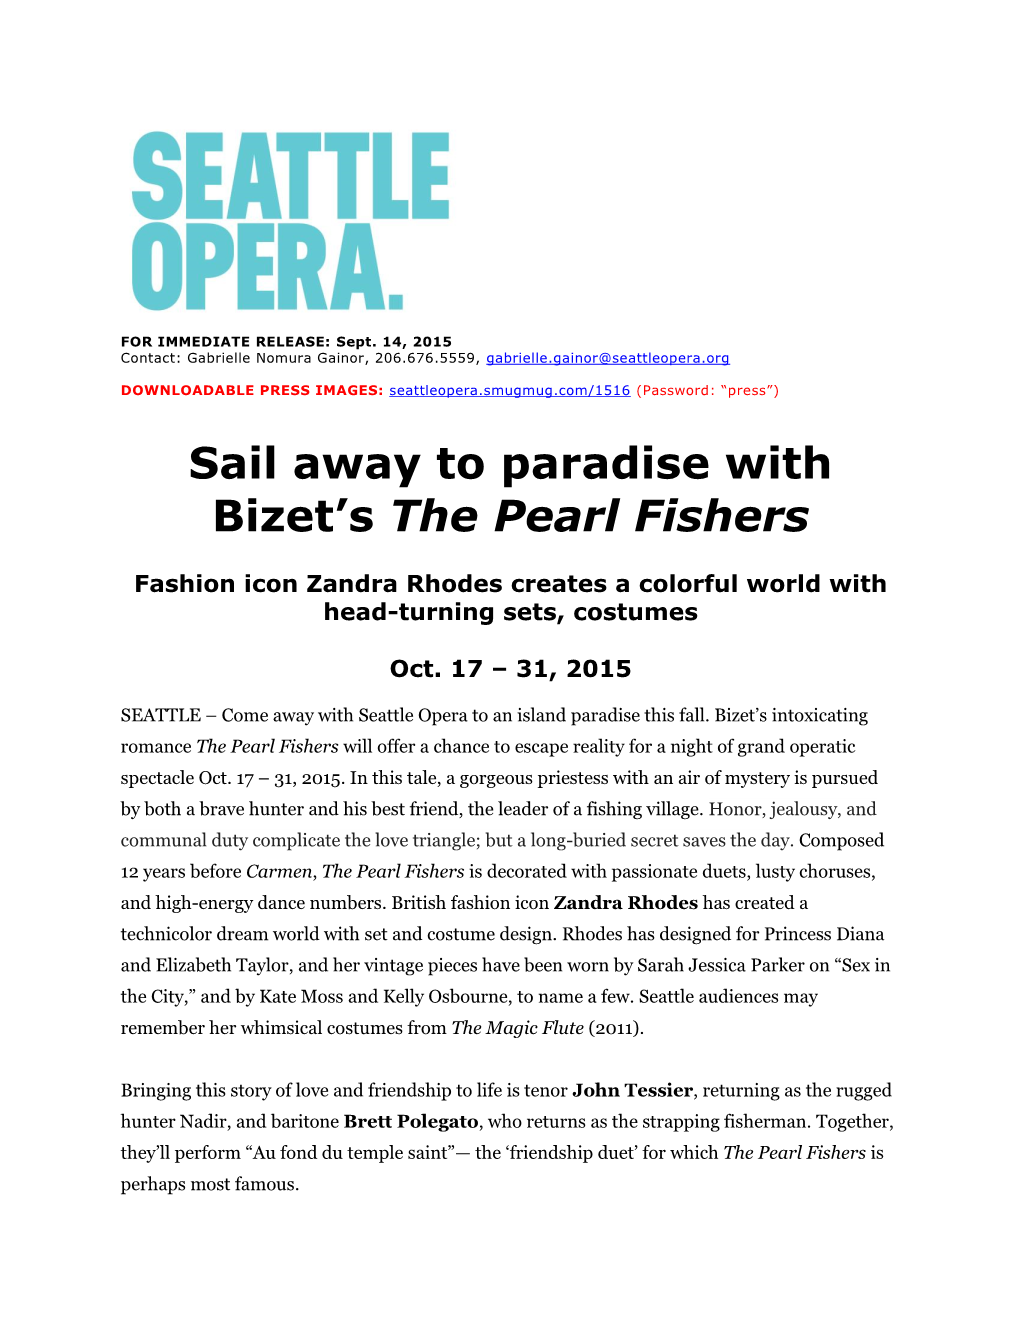 Sail Away to Paradise with Bizet's the Pearl Fishers